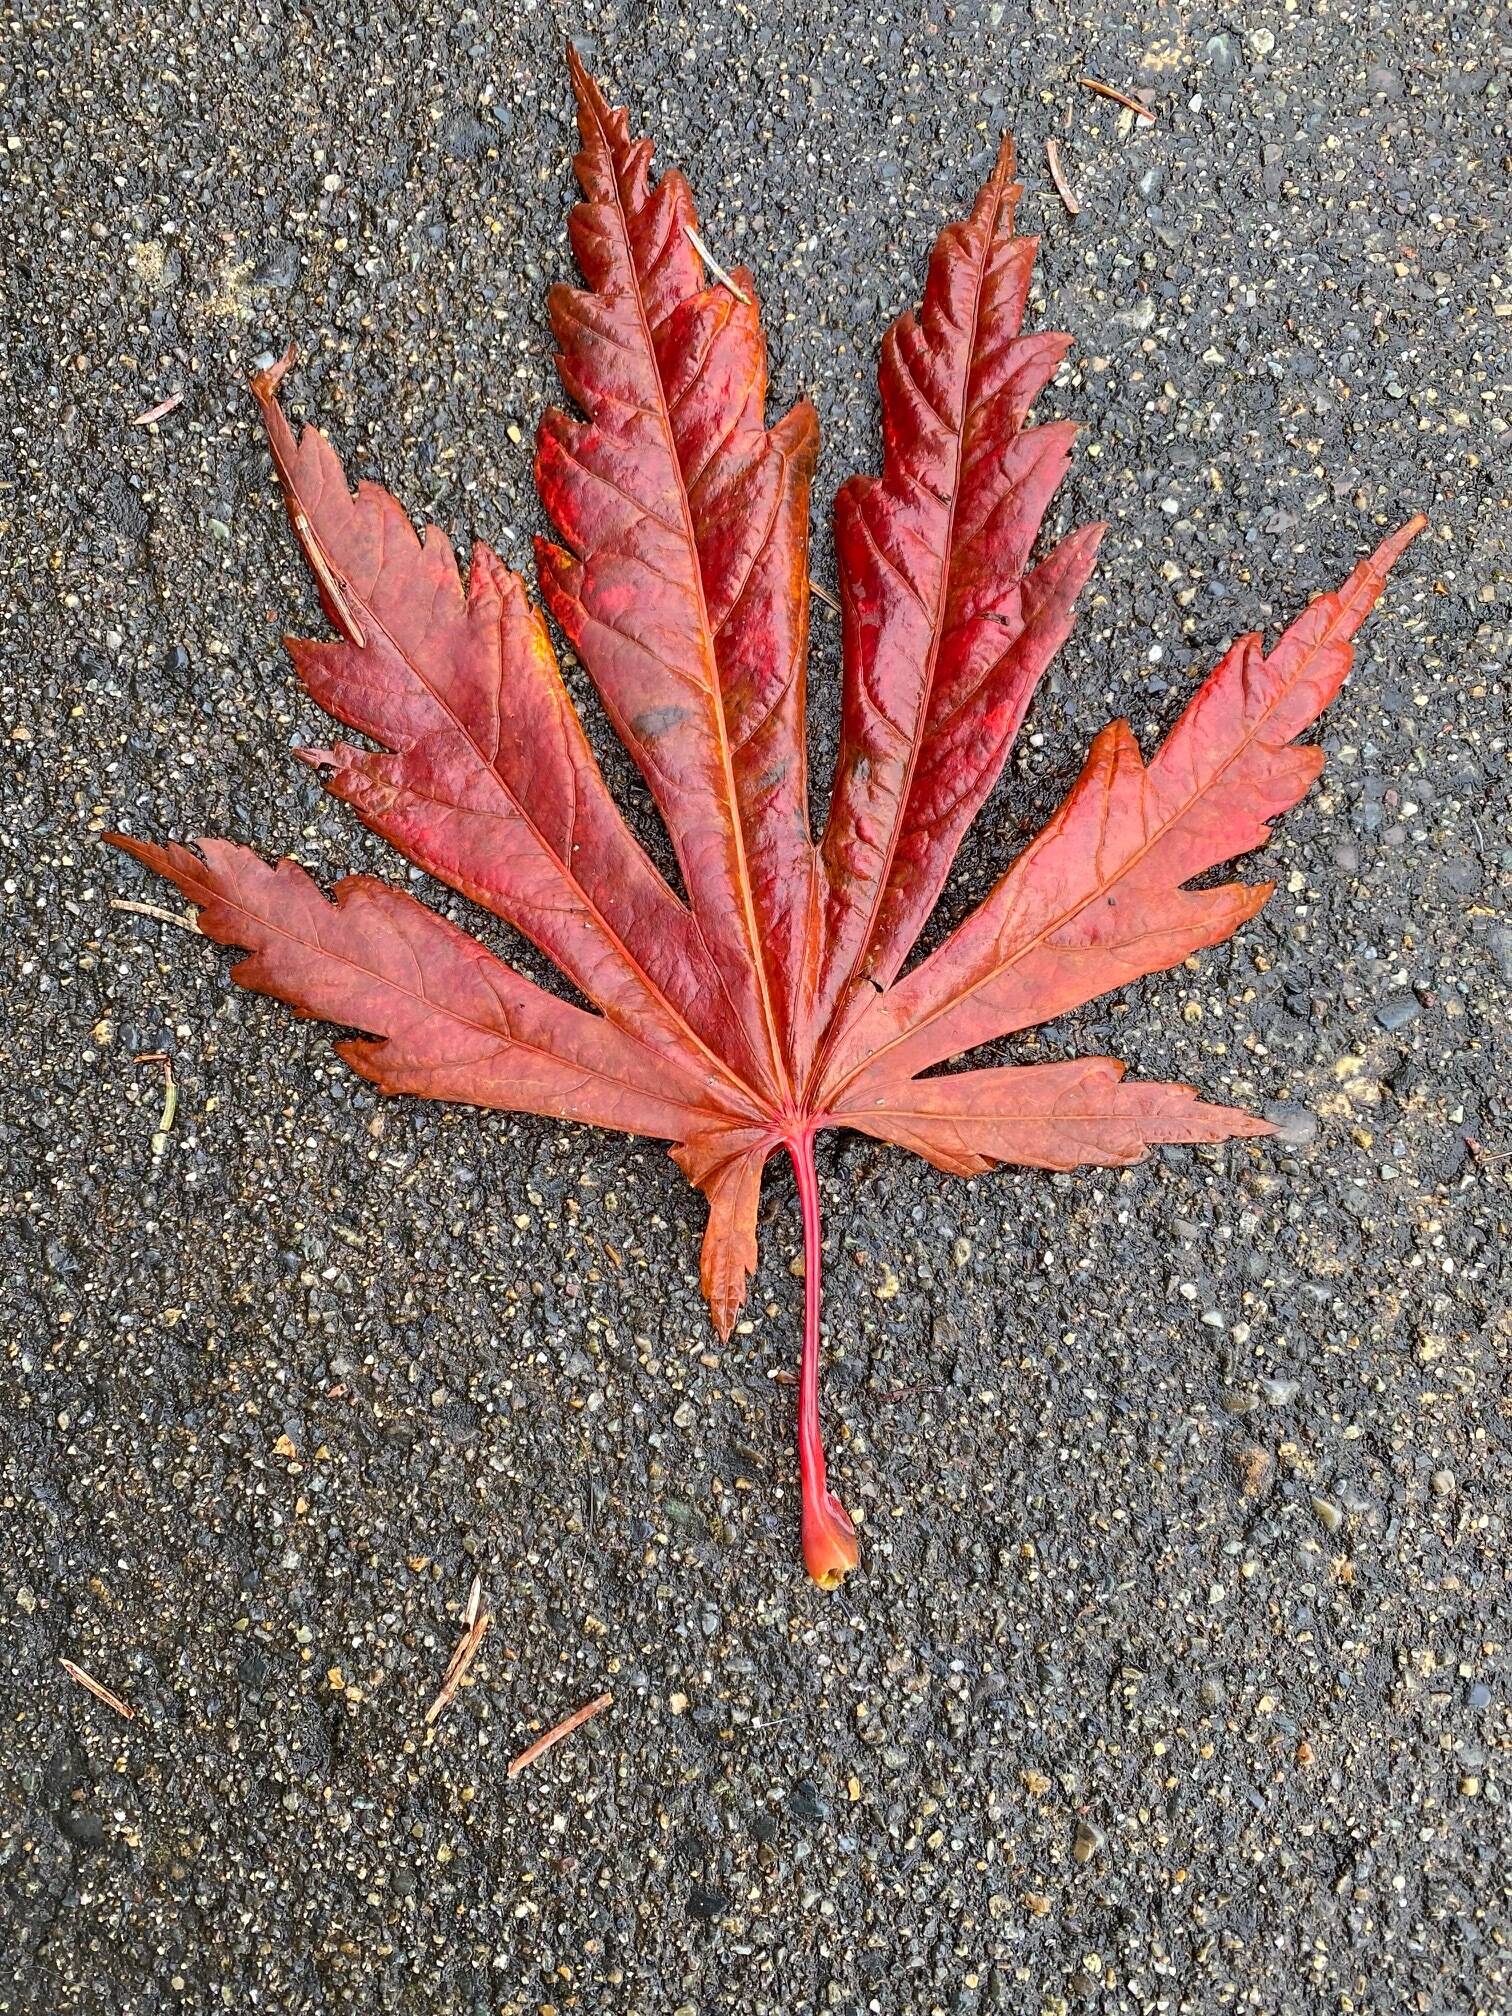 A red leaf brightens up the downtown sidewalk. (Courtesy Photo / Denise Carroll)